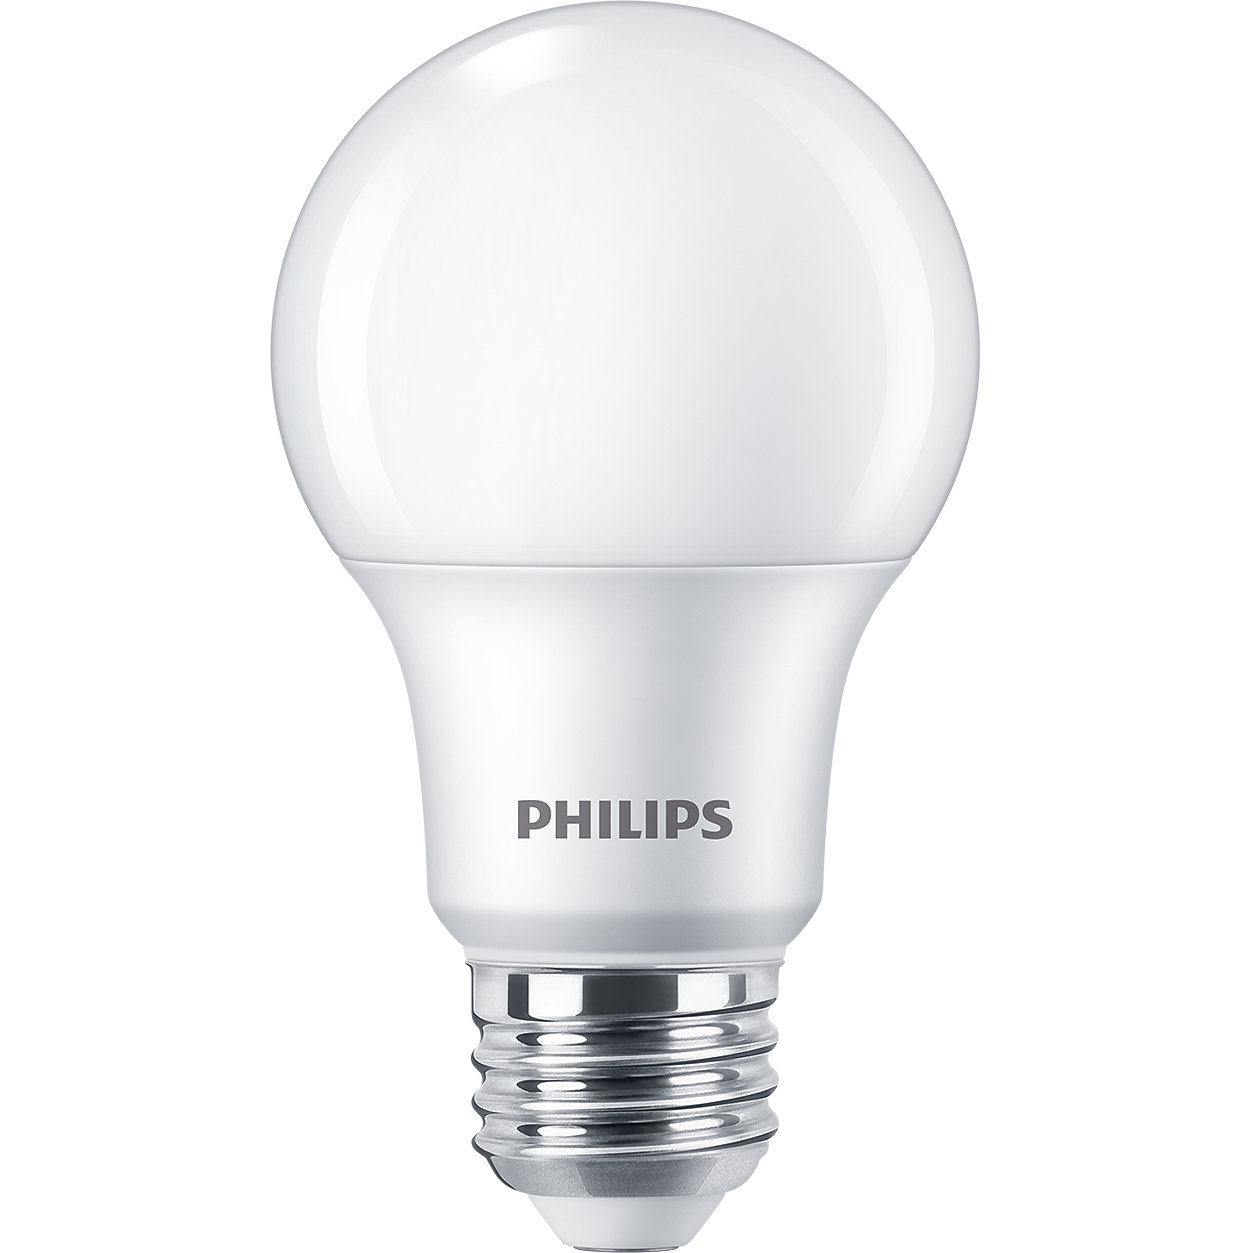 Attractive, dimmable LED alternative to popular incandescents.